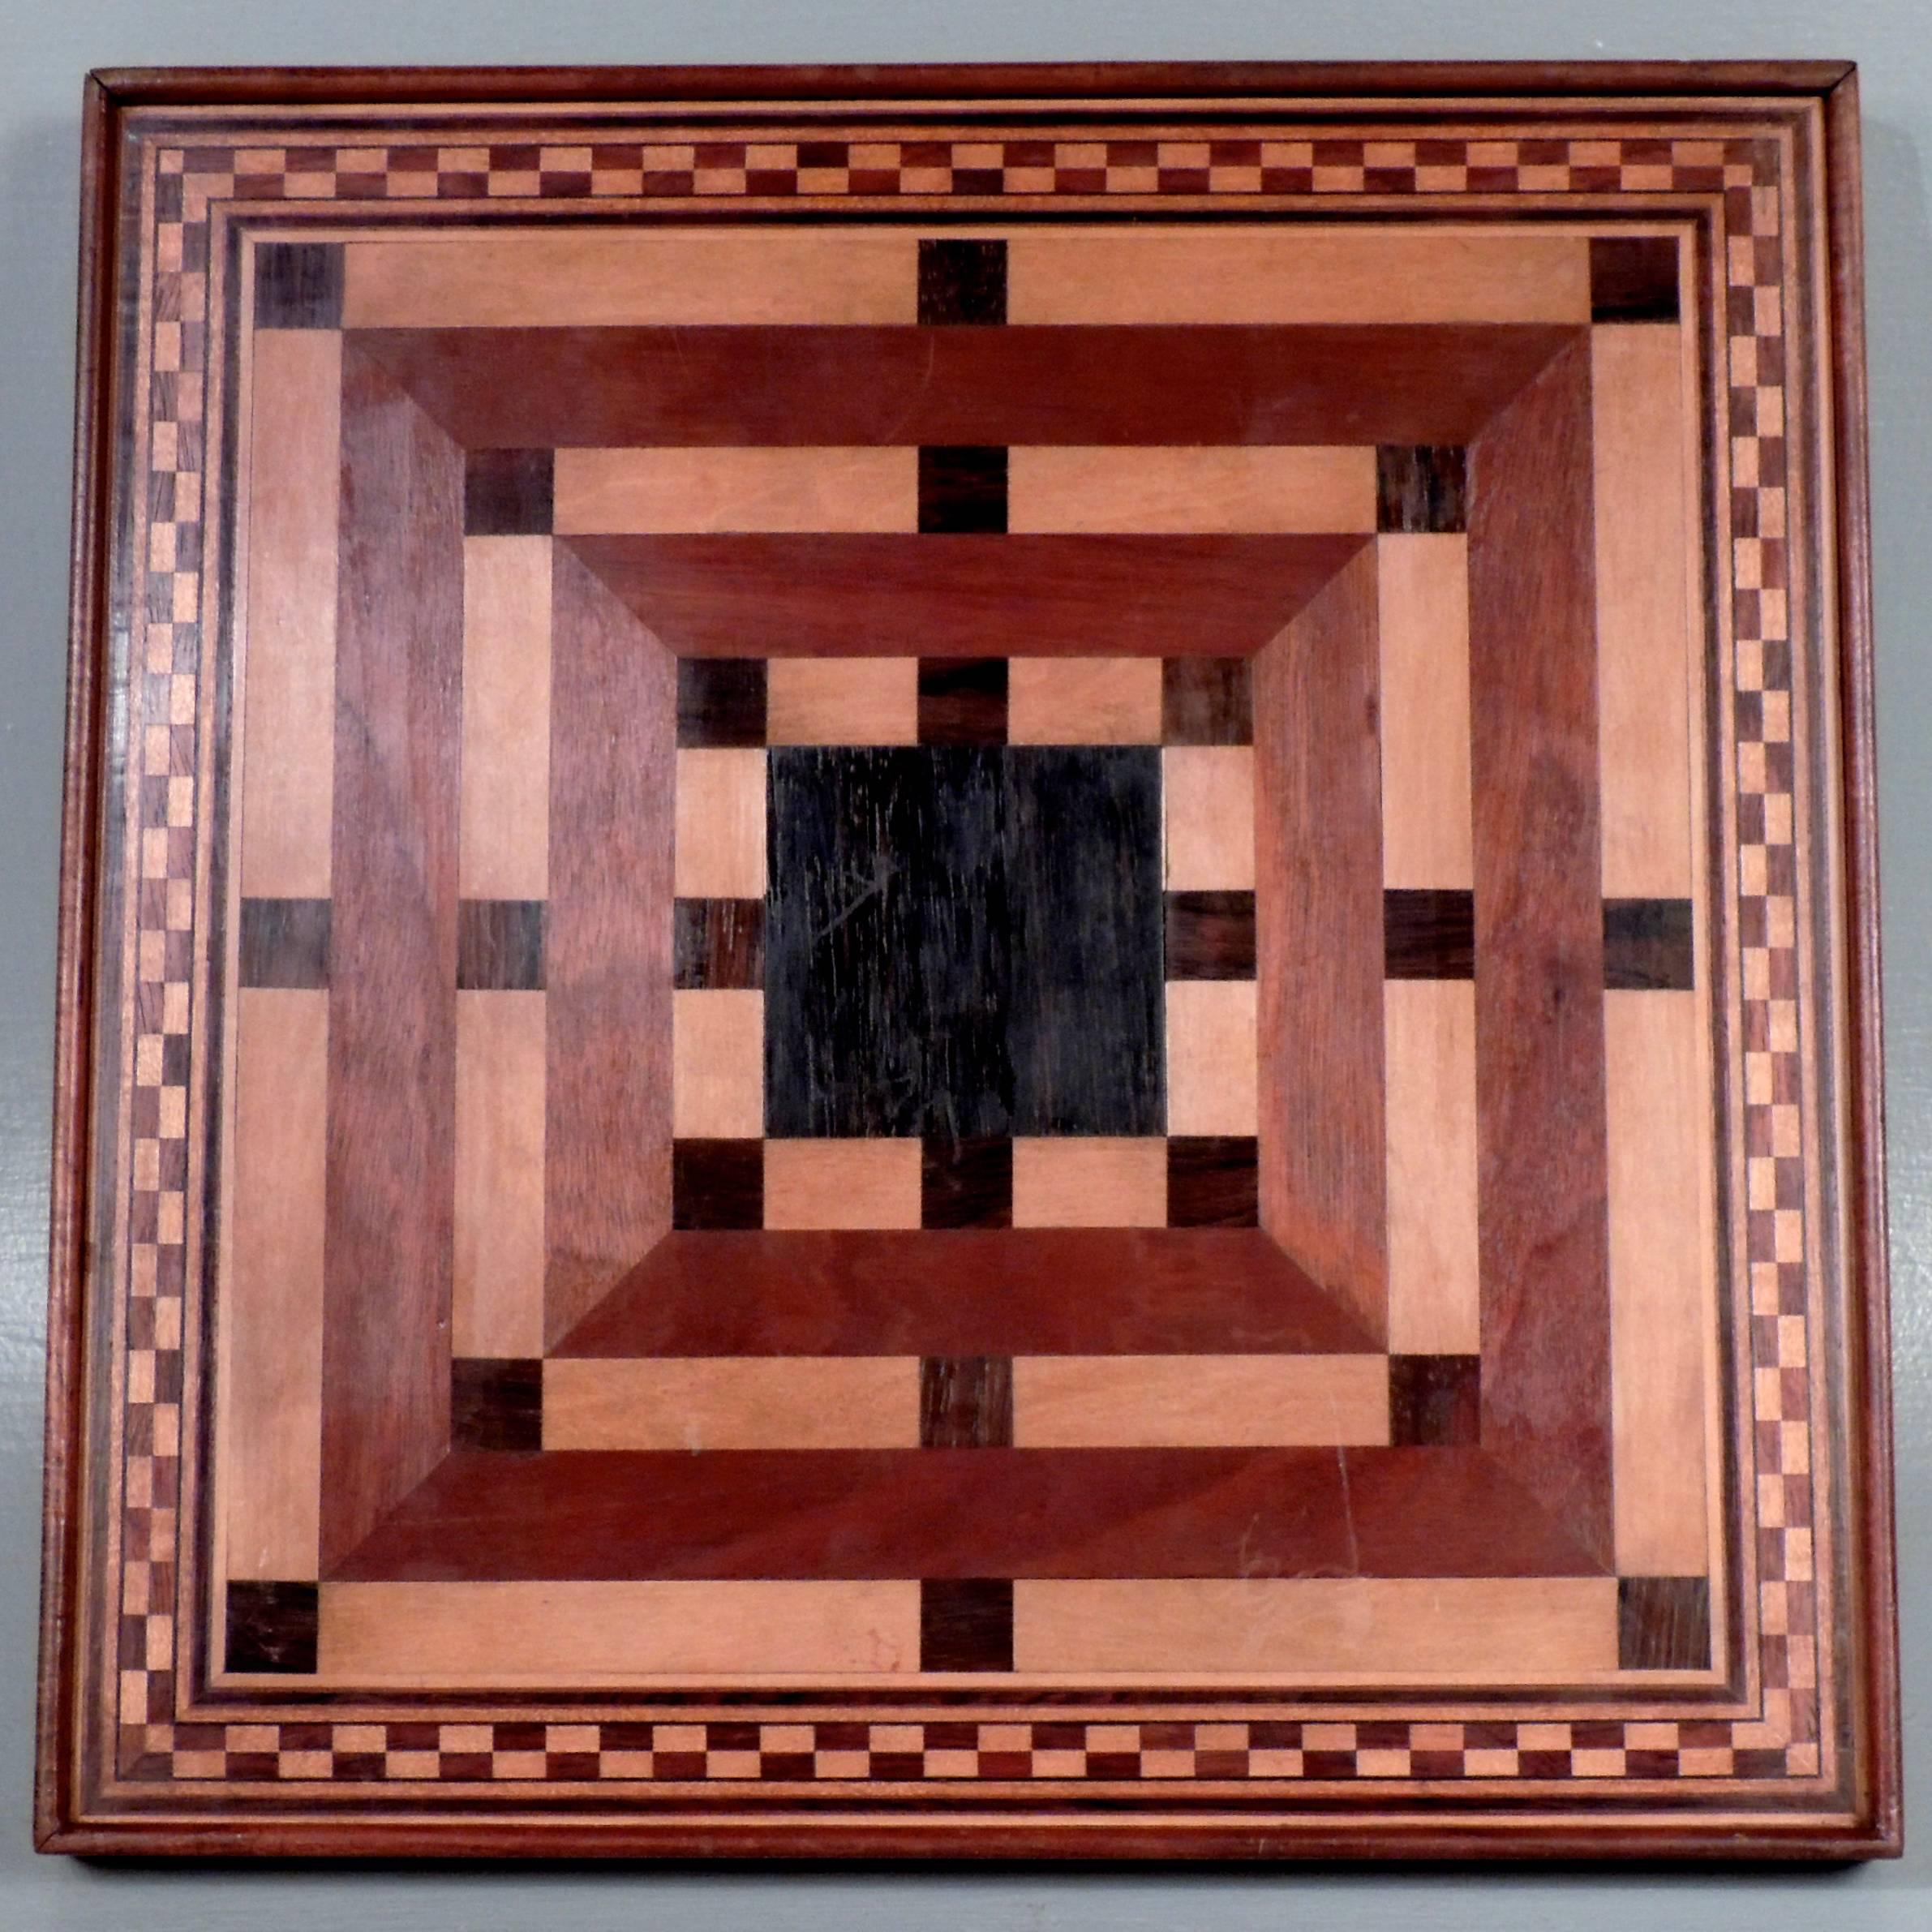 This is a fine handmade inlaid wooden game board. The front is for checkers and chess. They reverse is a starburst pattern and is probably for some variant of parcheesi. Made of mahogany, ebony, rosewood, and satinwood. Dates to the early to